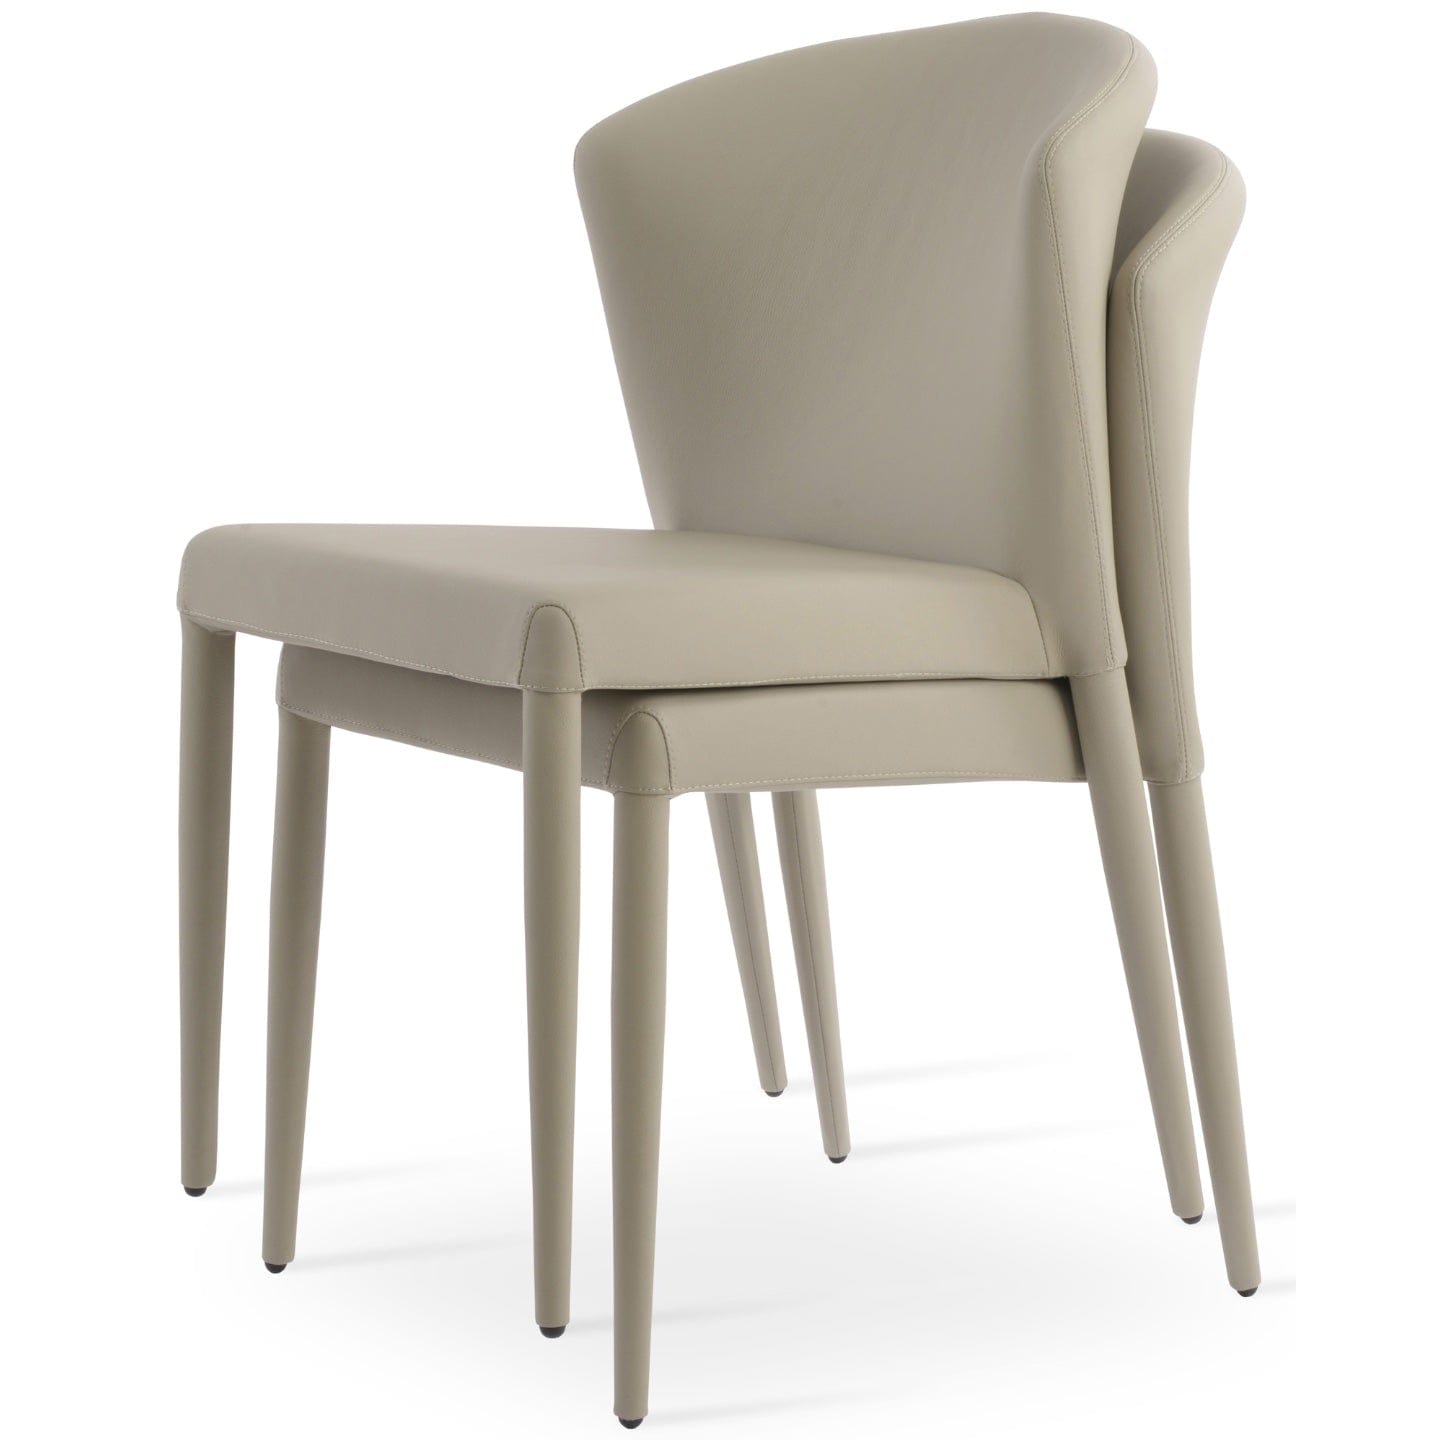 sohoConcept Kitchen & Dining Room Chairs Capri Stackable Restaurant Chairs | Grey Leather Metal Dining Chairs